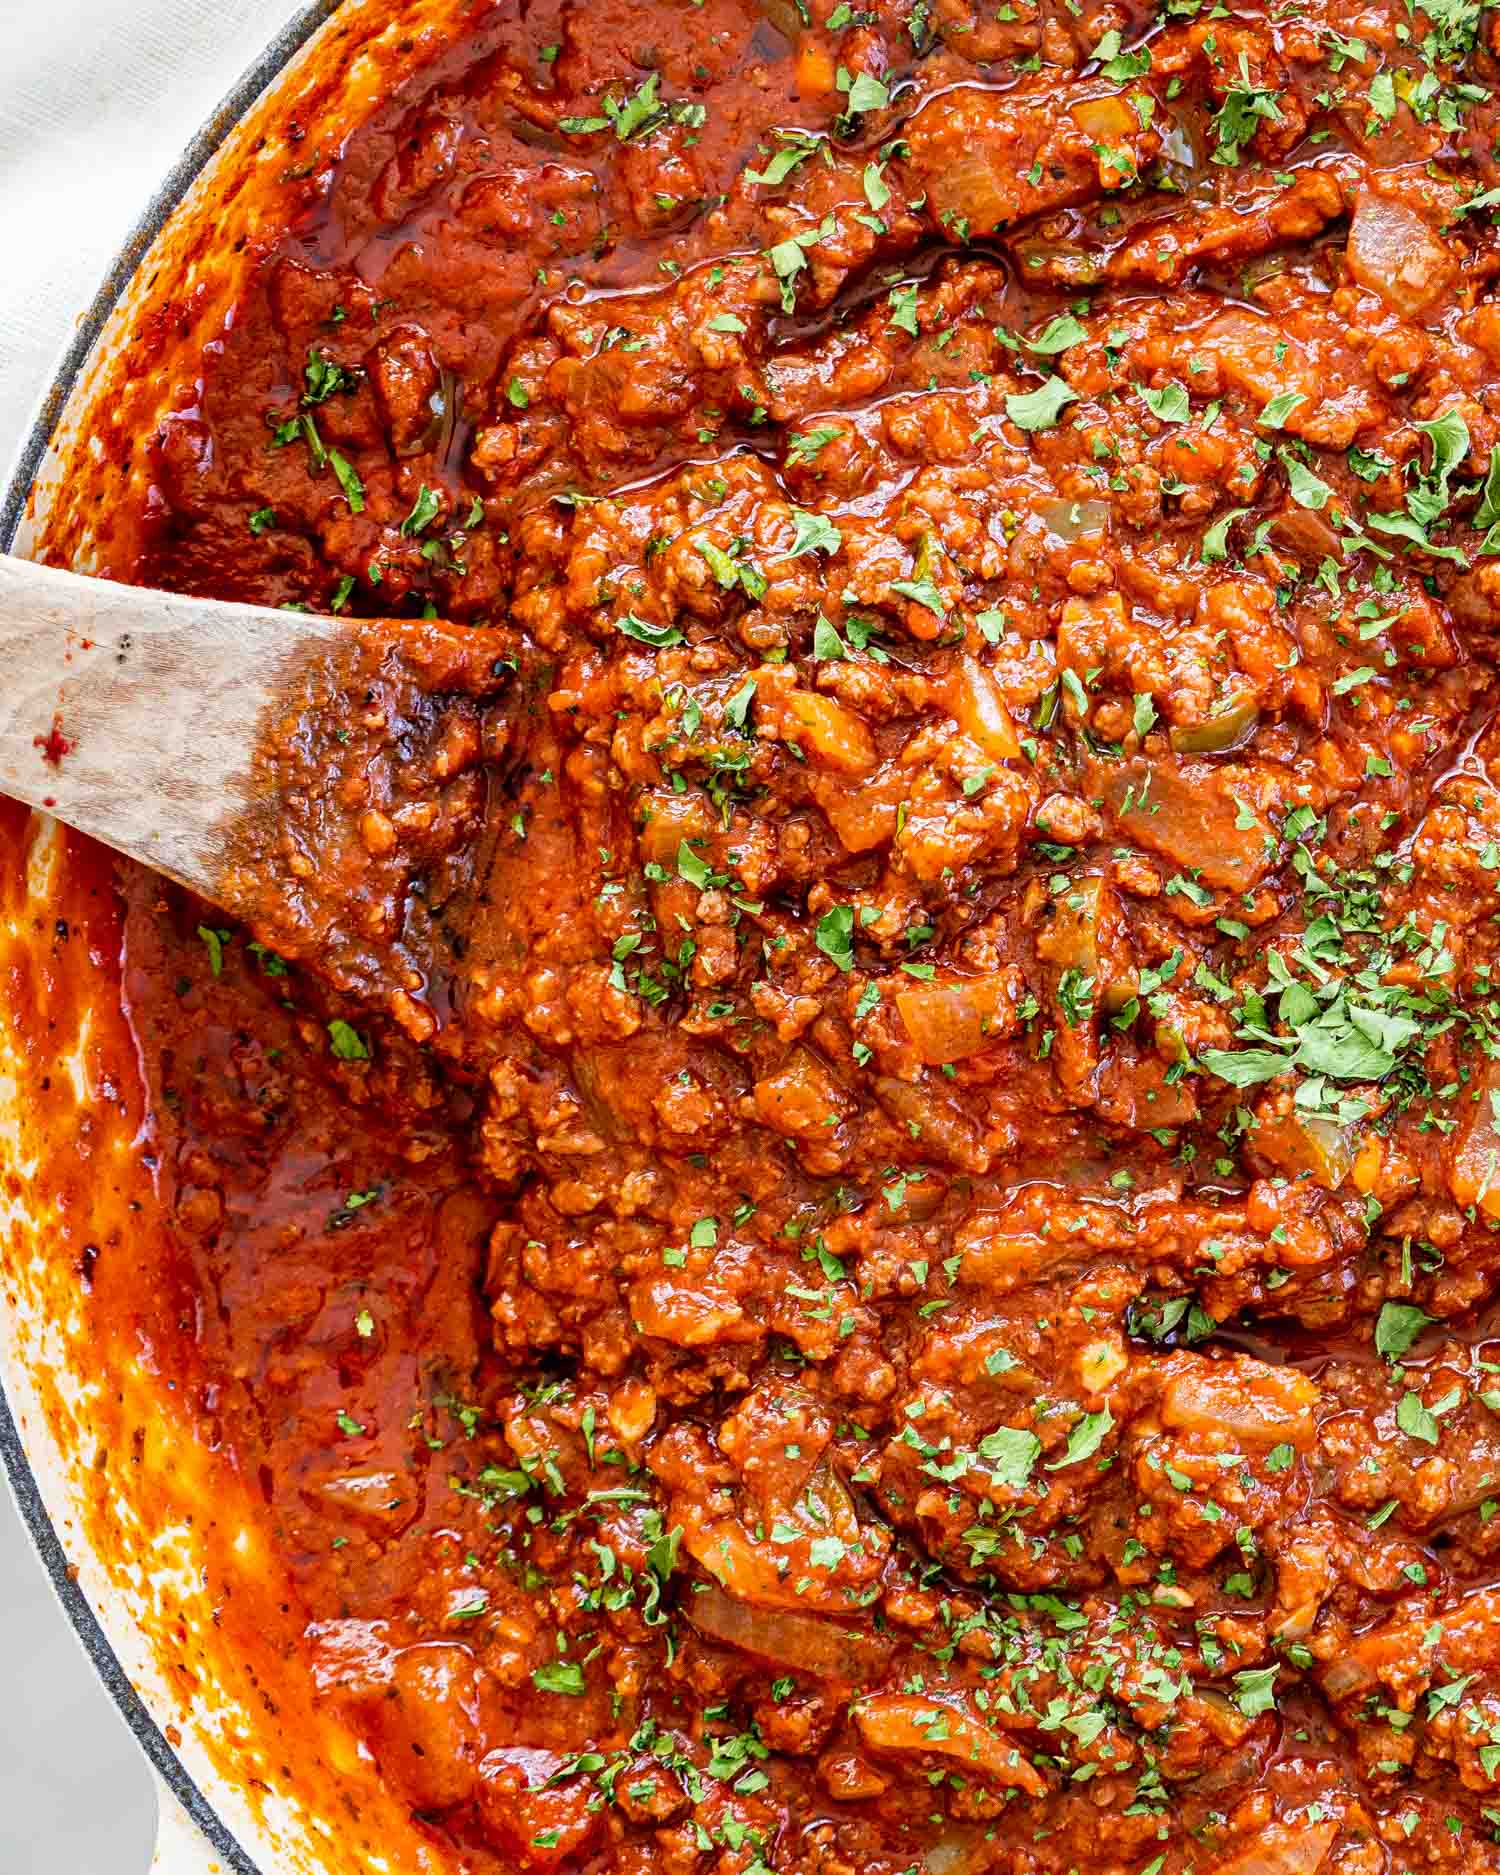 meat sauce in a braiser with a wooden spoon in it and garnished with parsley